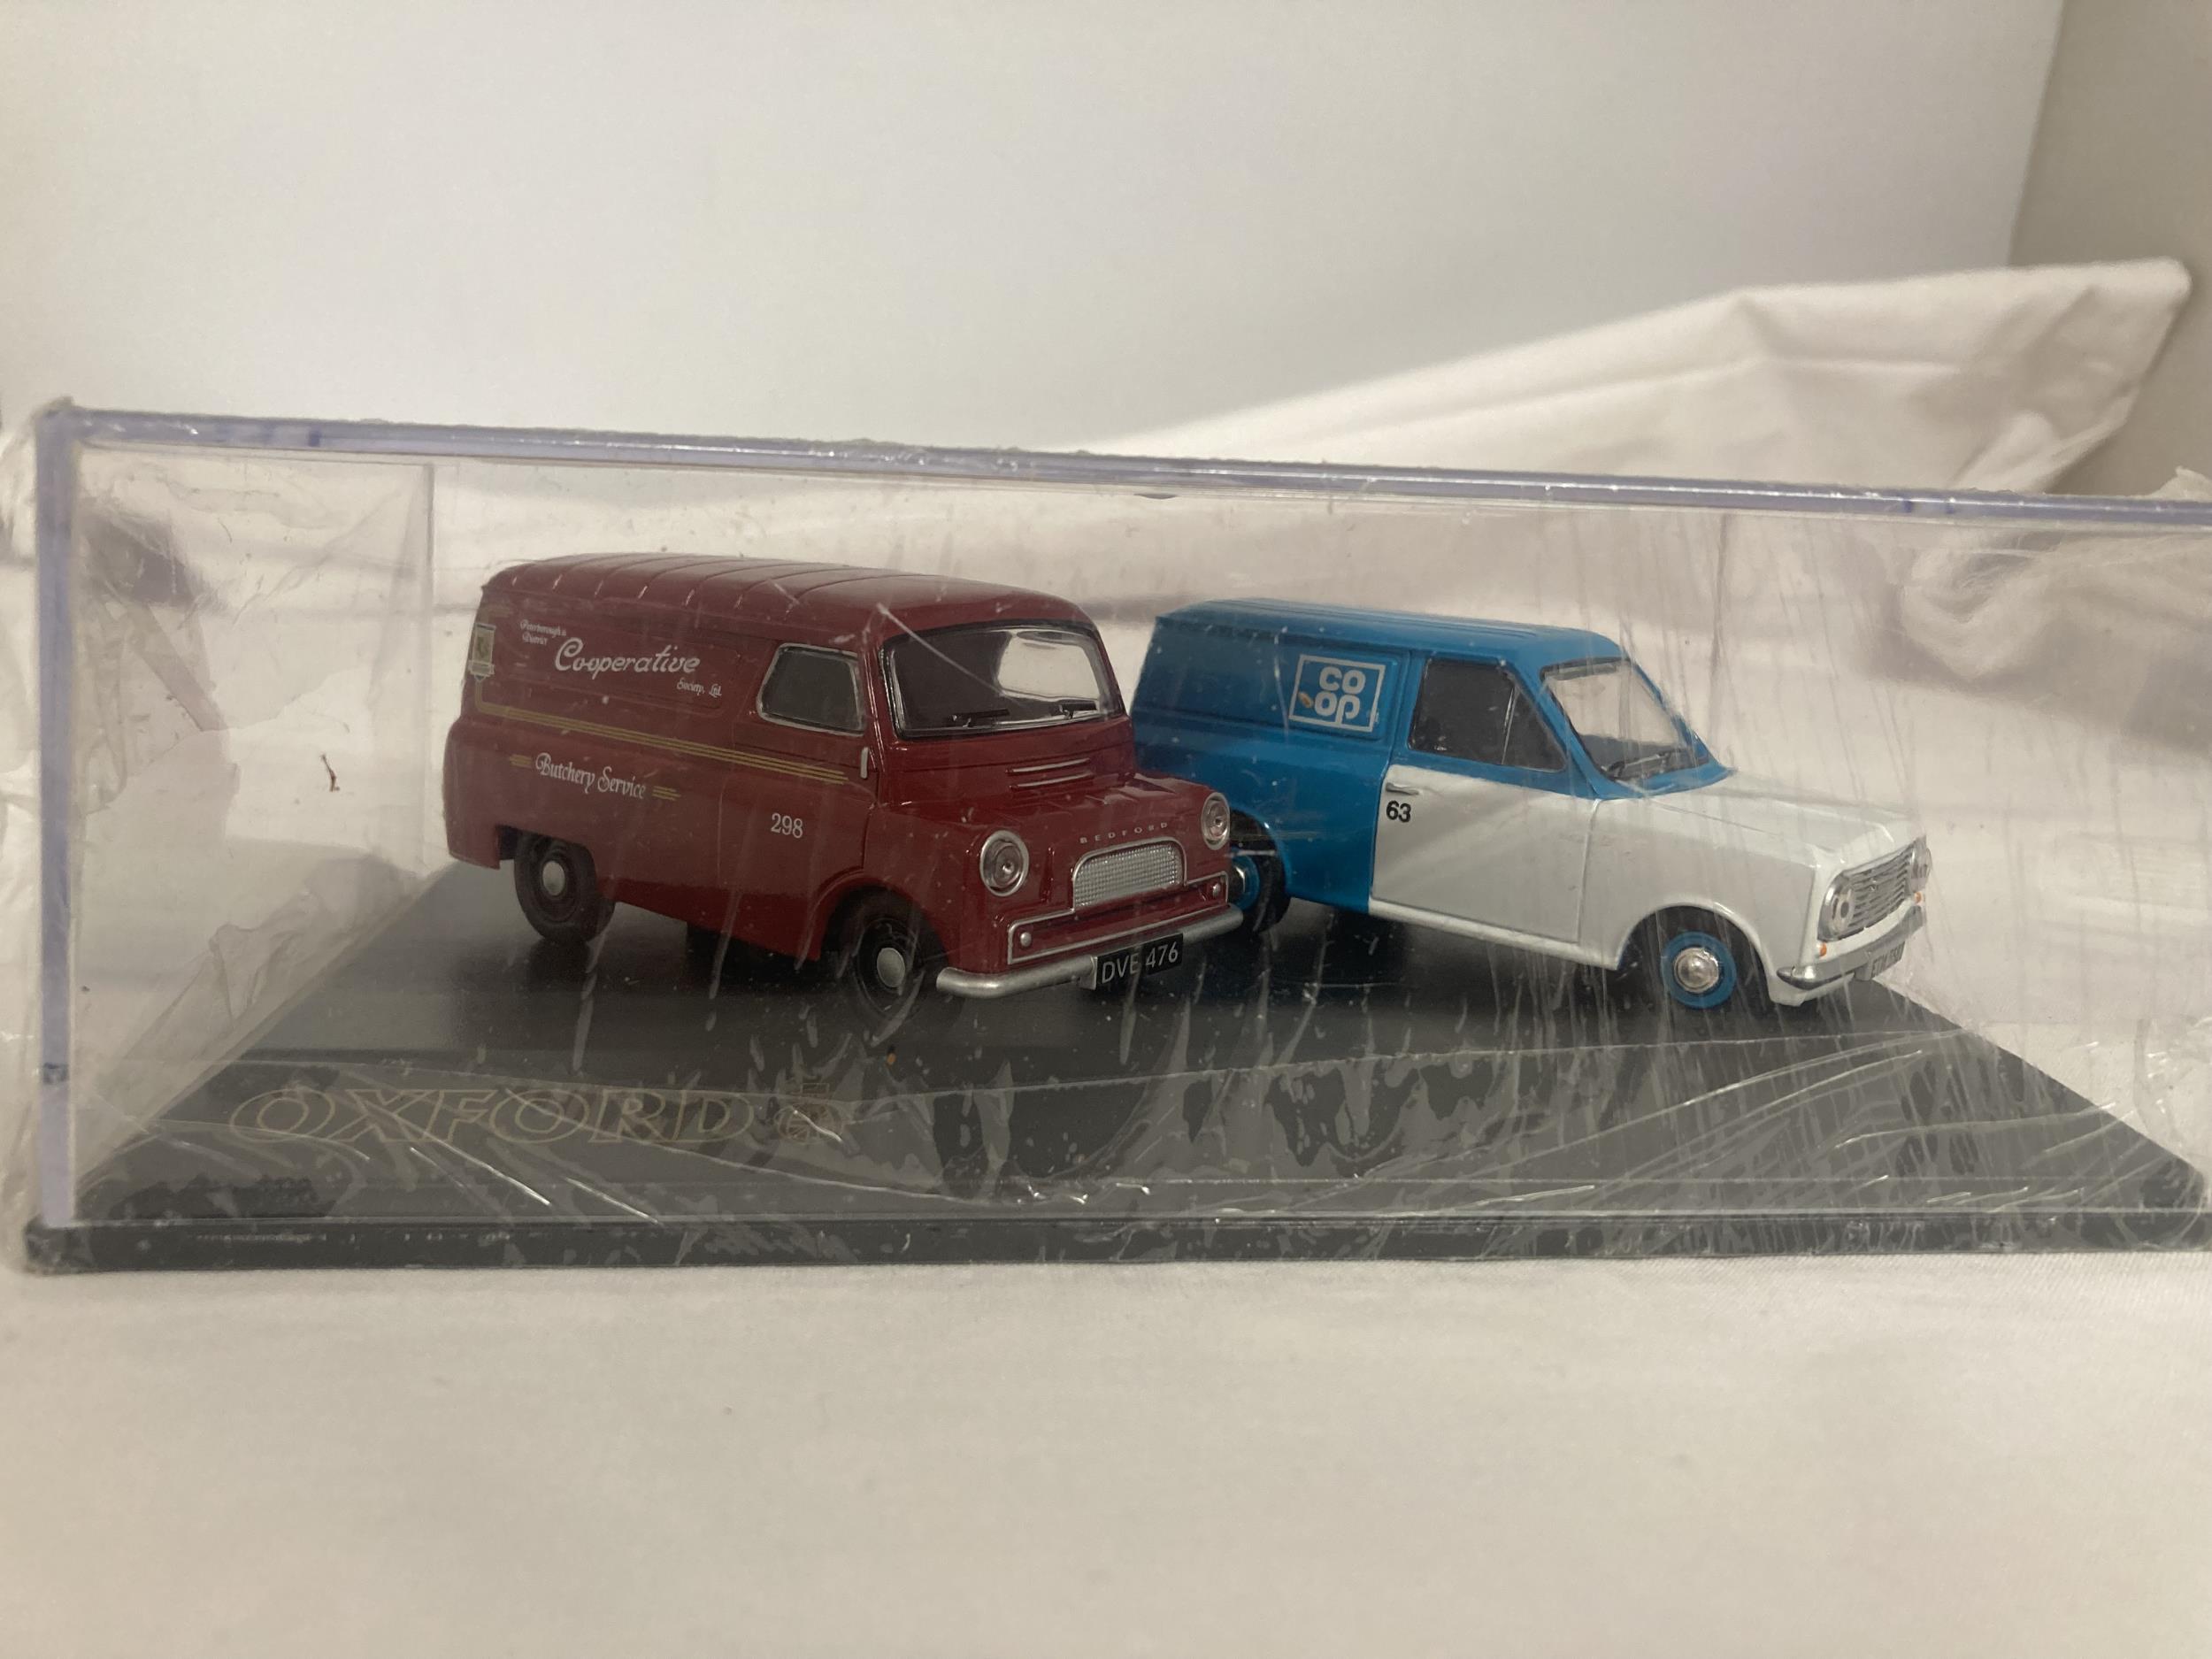 TWO OXFORD DIECAST MODELS - SET NO. 27 - CO-OP VANS, RICHARD READ LORRY - Image 3 of 3